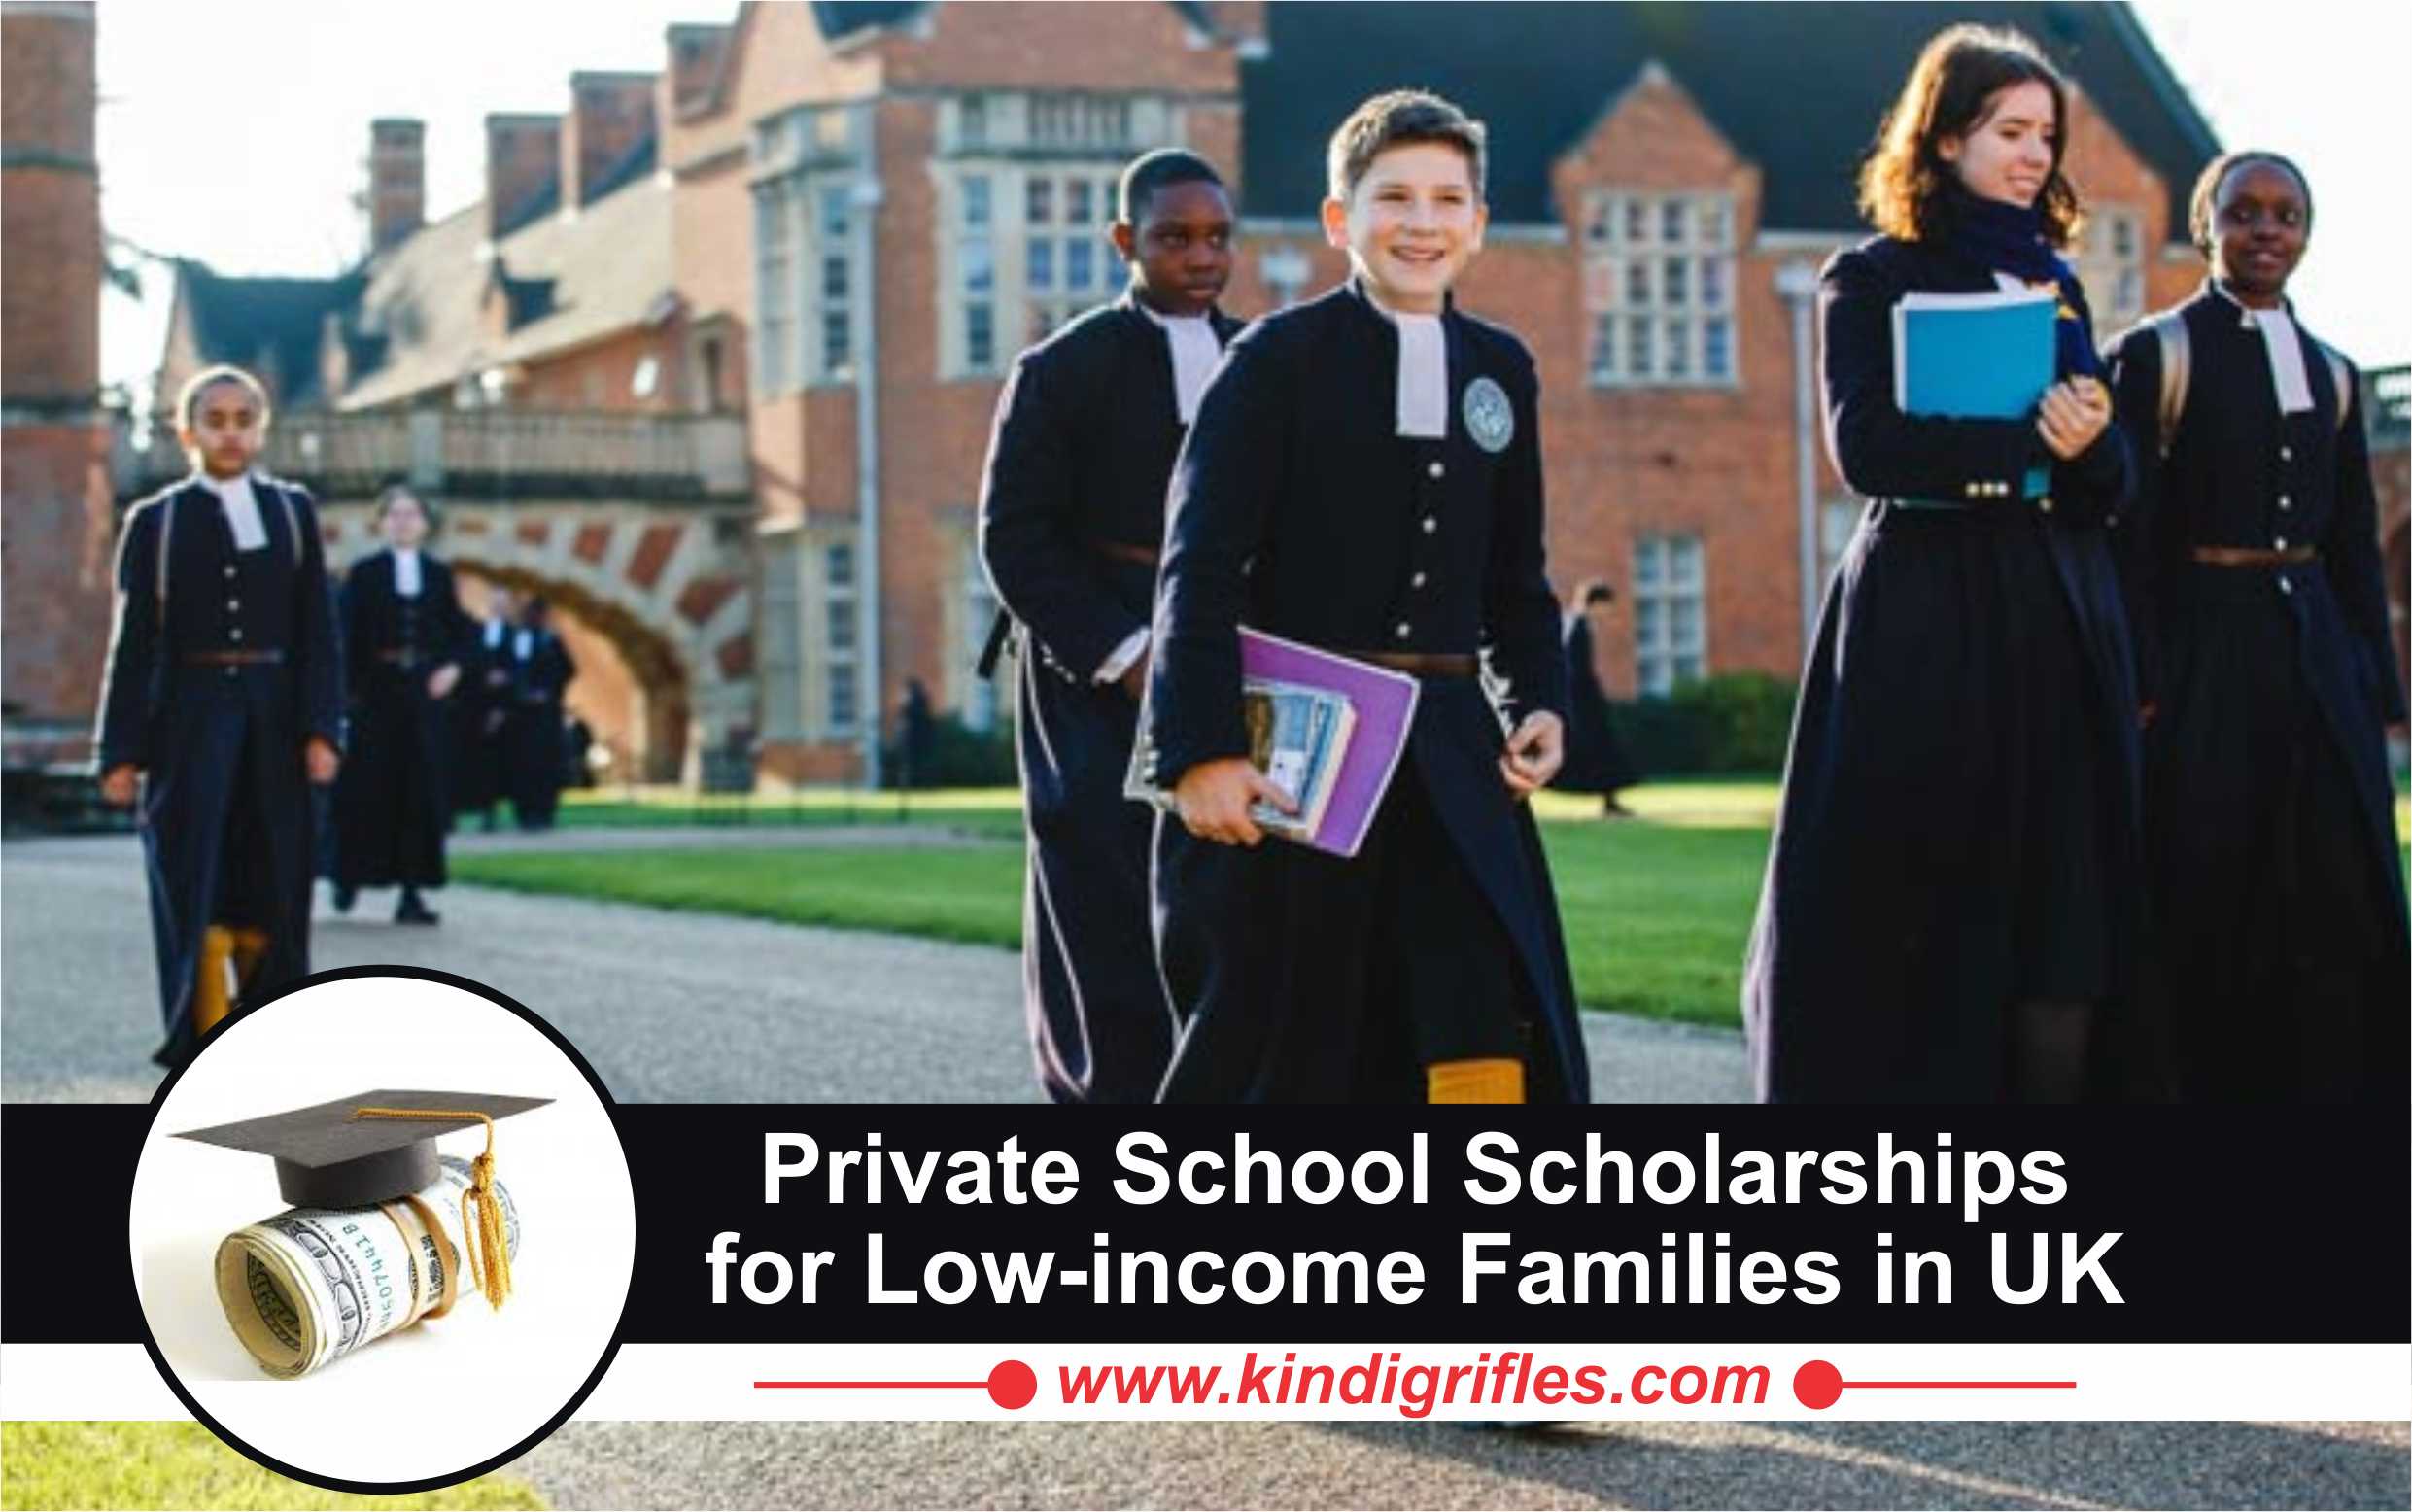 Private school scholarships for low-income families in UK